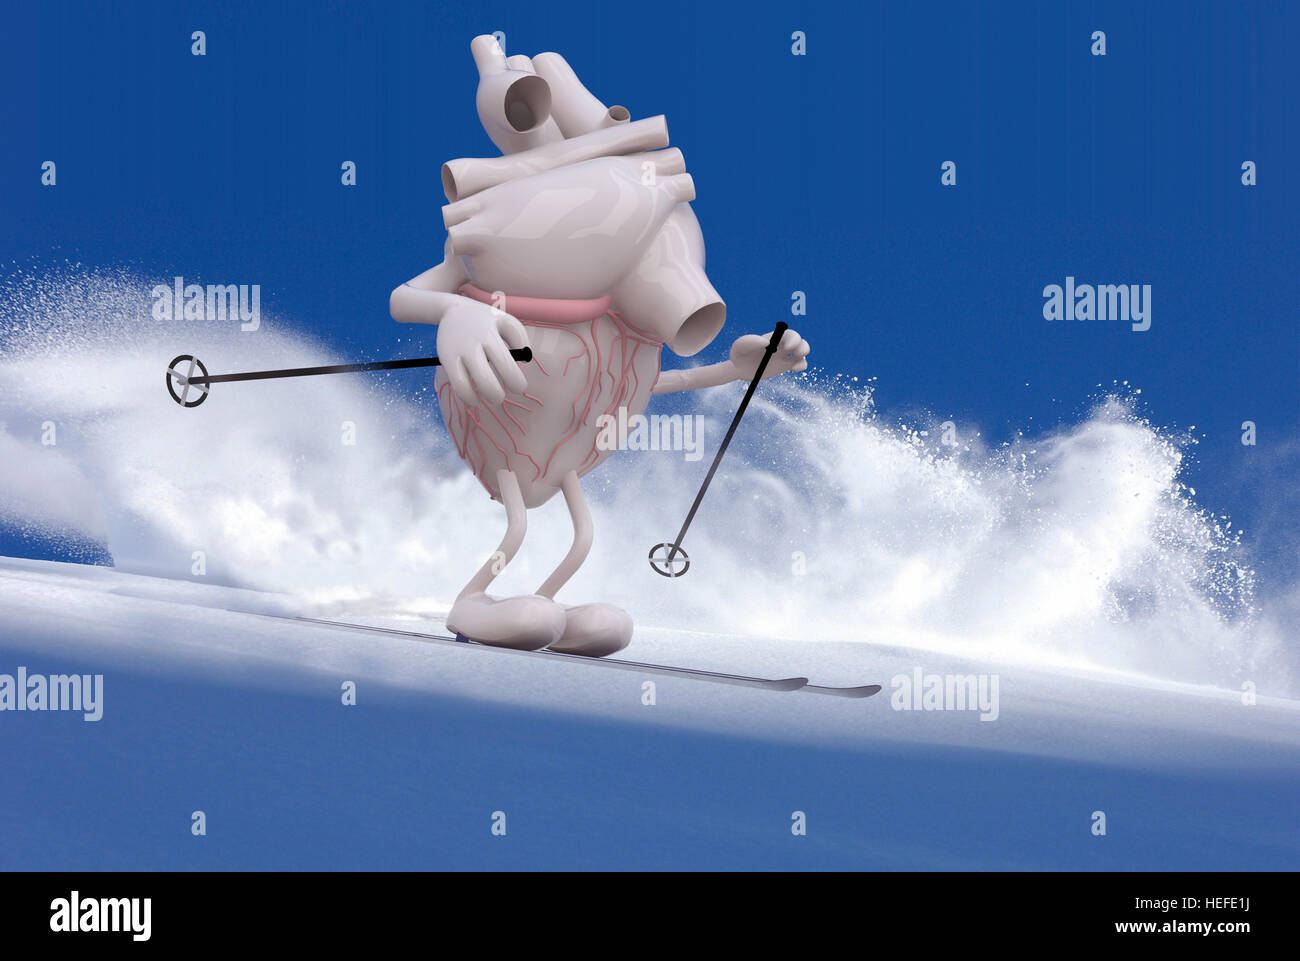 human heart organ with arms and legs that is skiing, 3d illustration Stock Photo